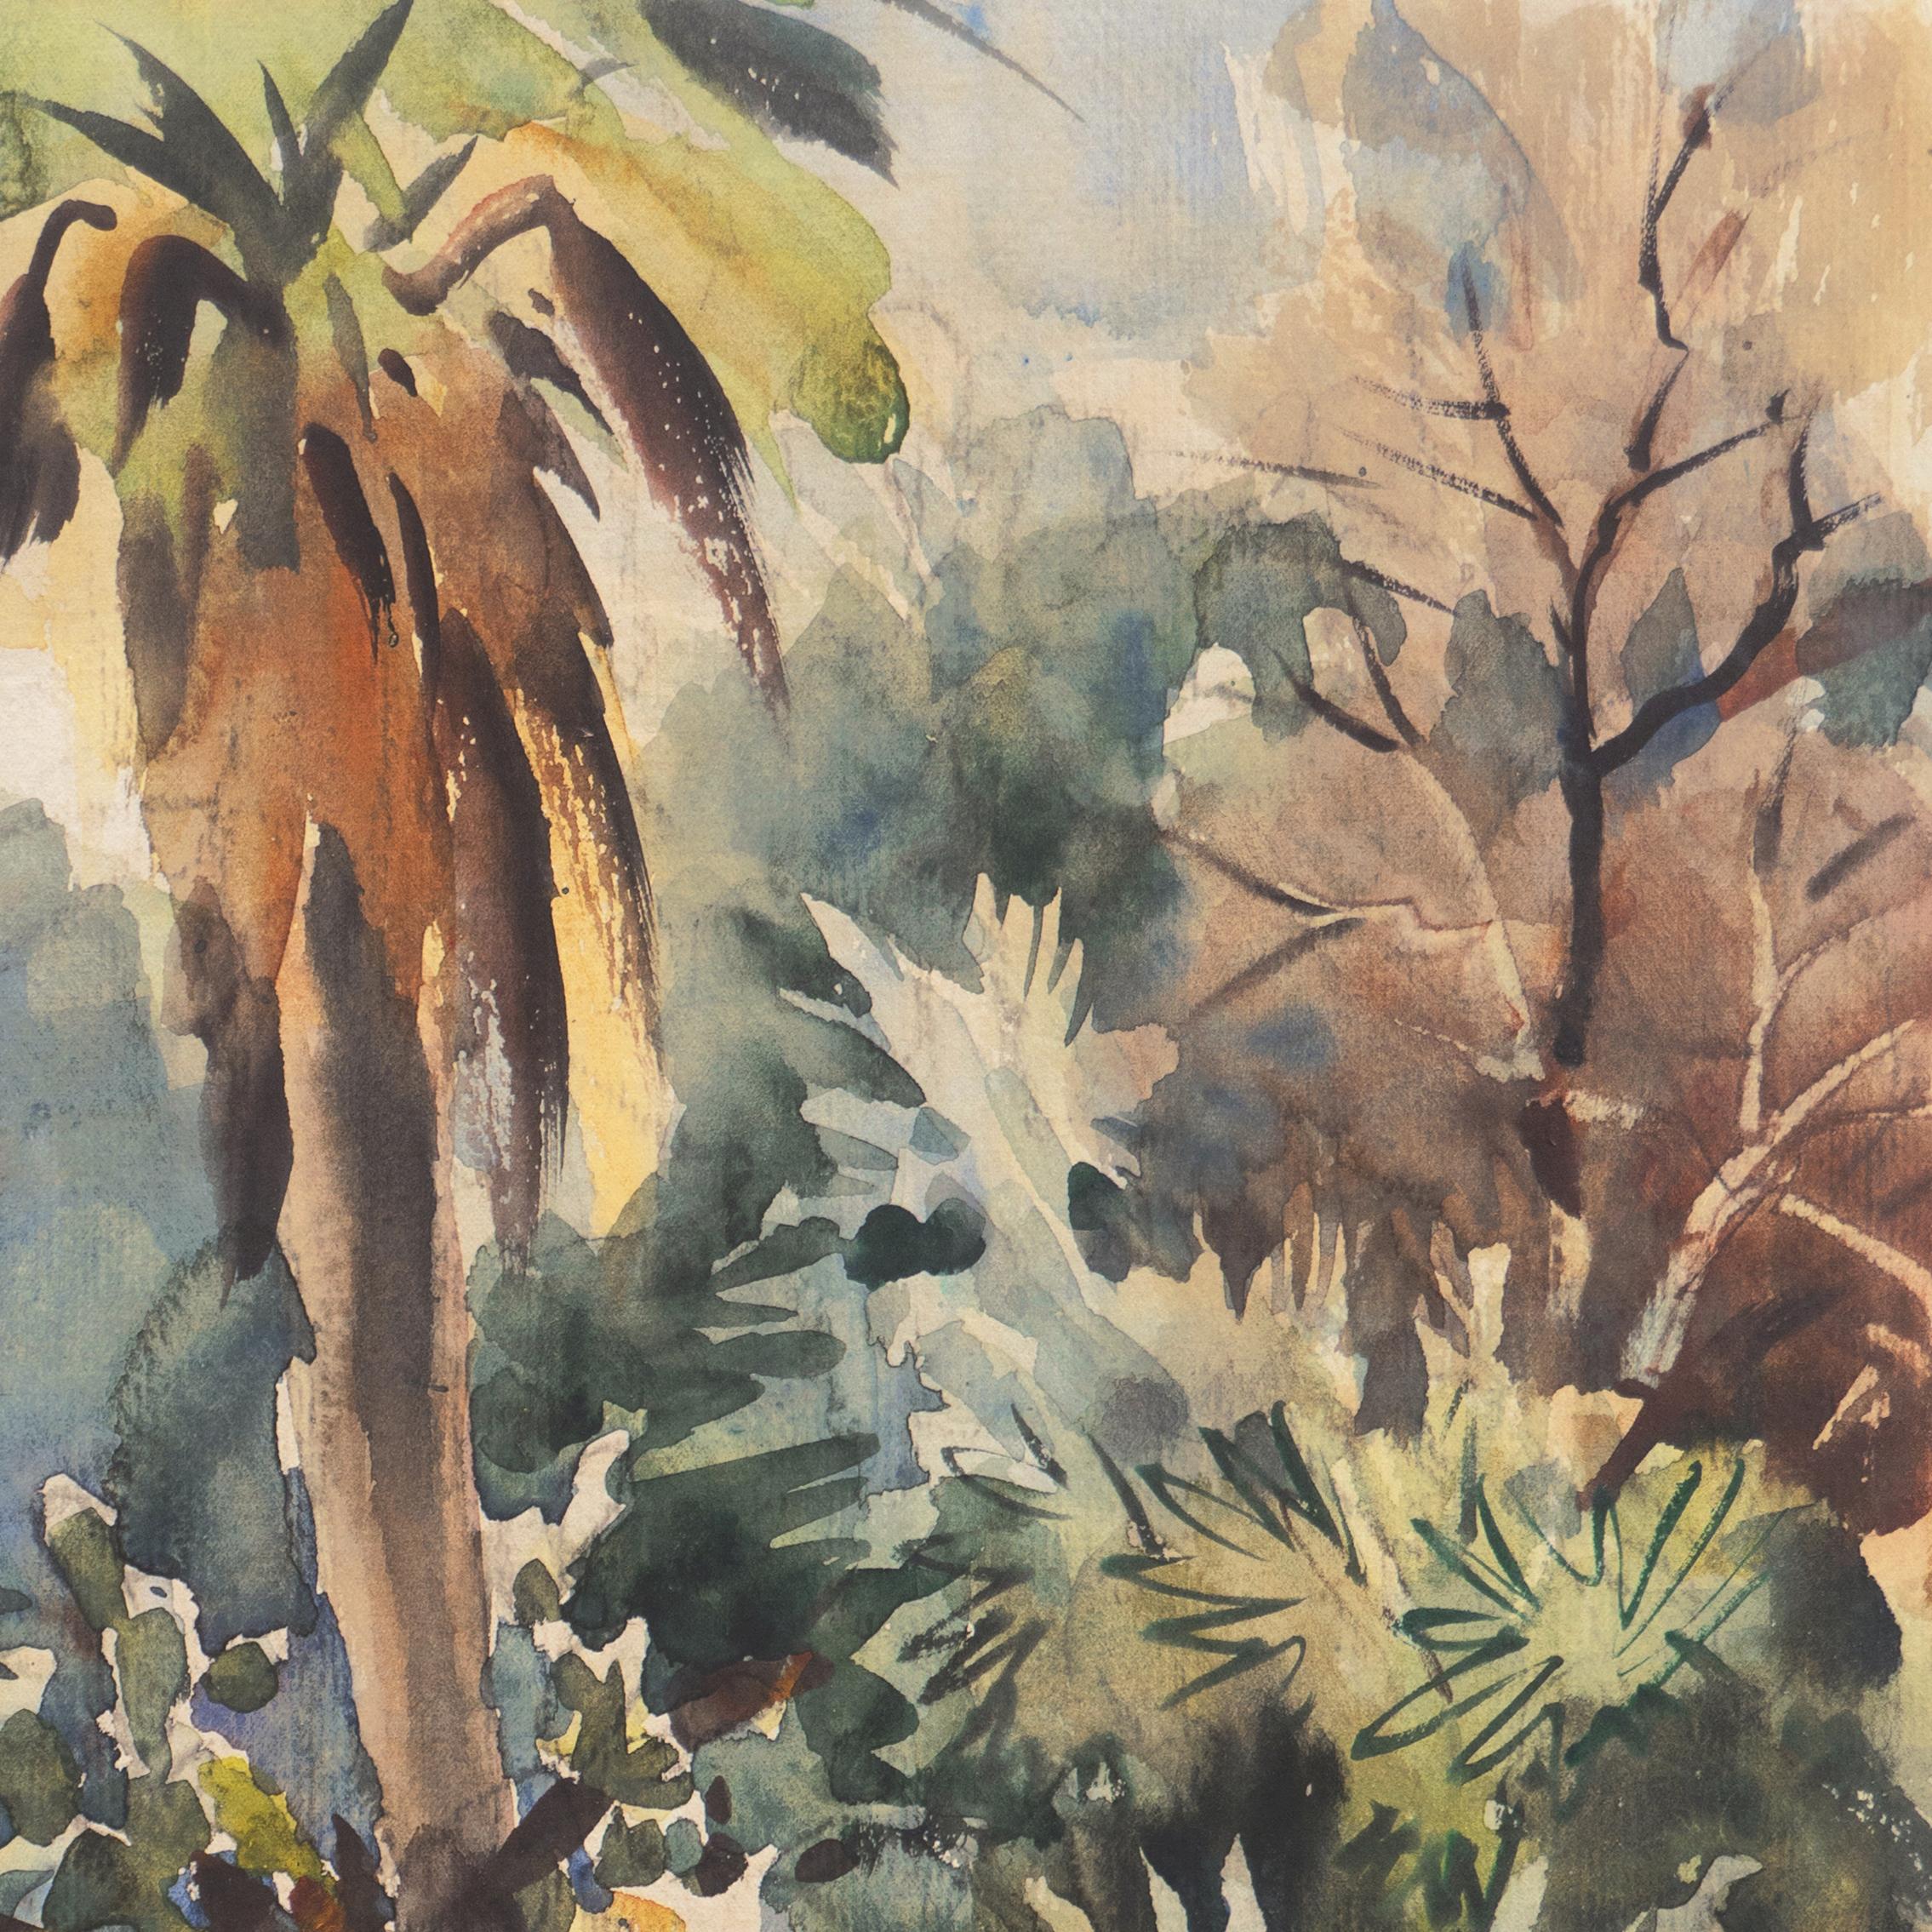 'Impressionist Landscape with Agave', Sequoia Art Group, California Plein Air - Brown Landscape Art by Ralph Ledesma